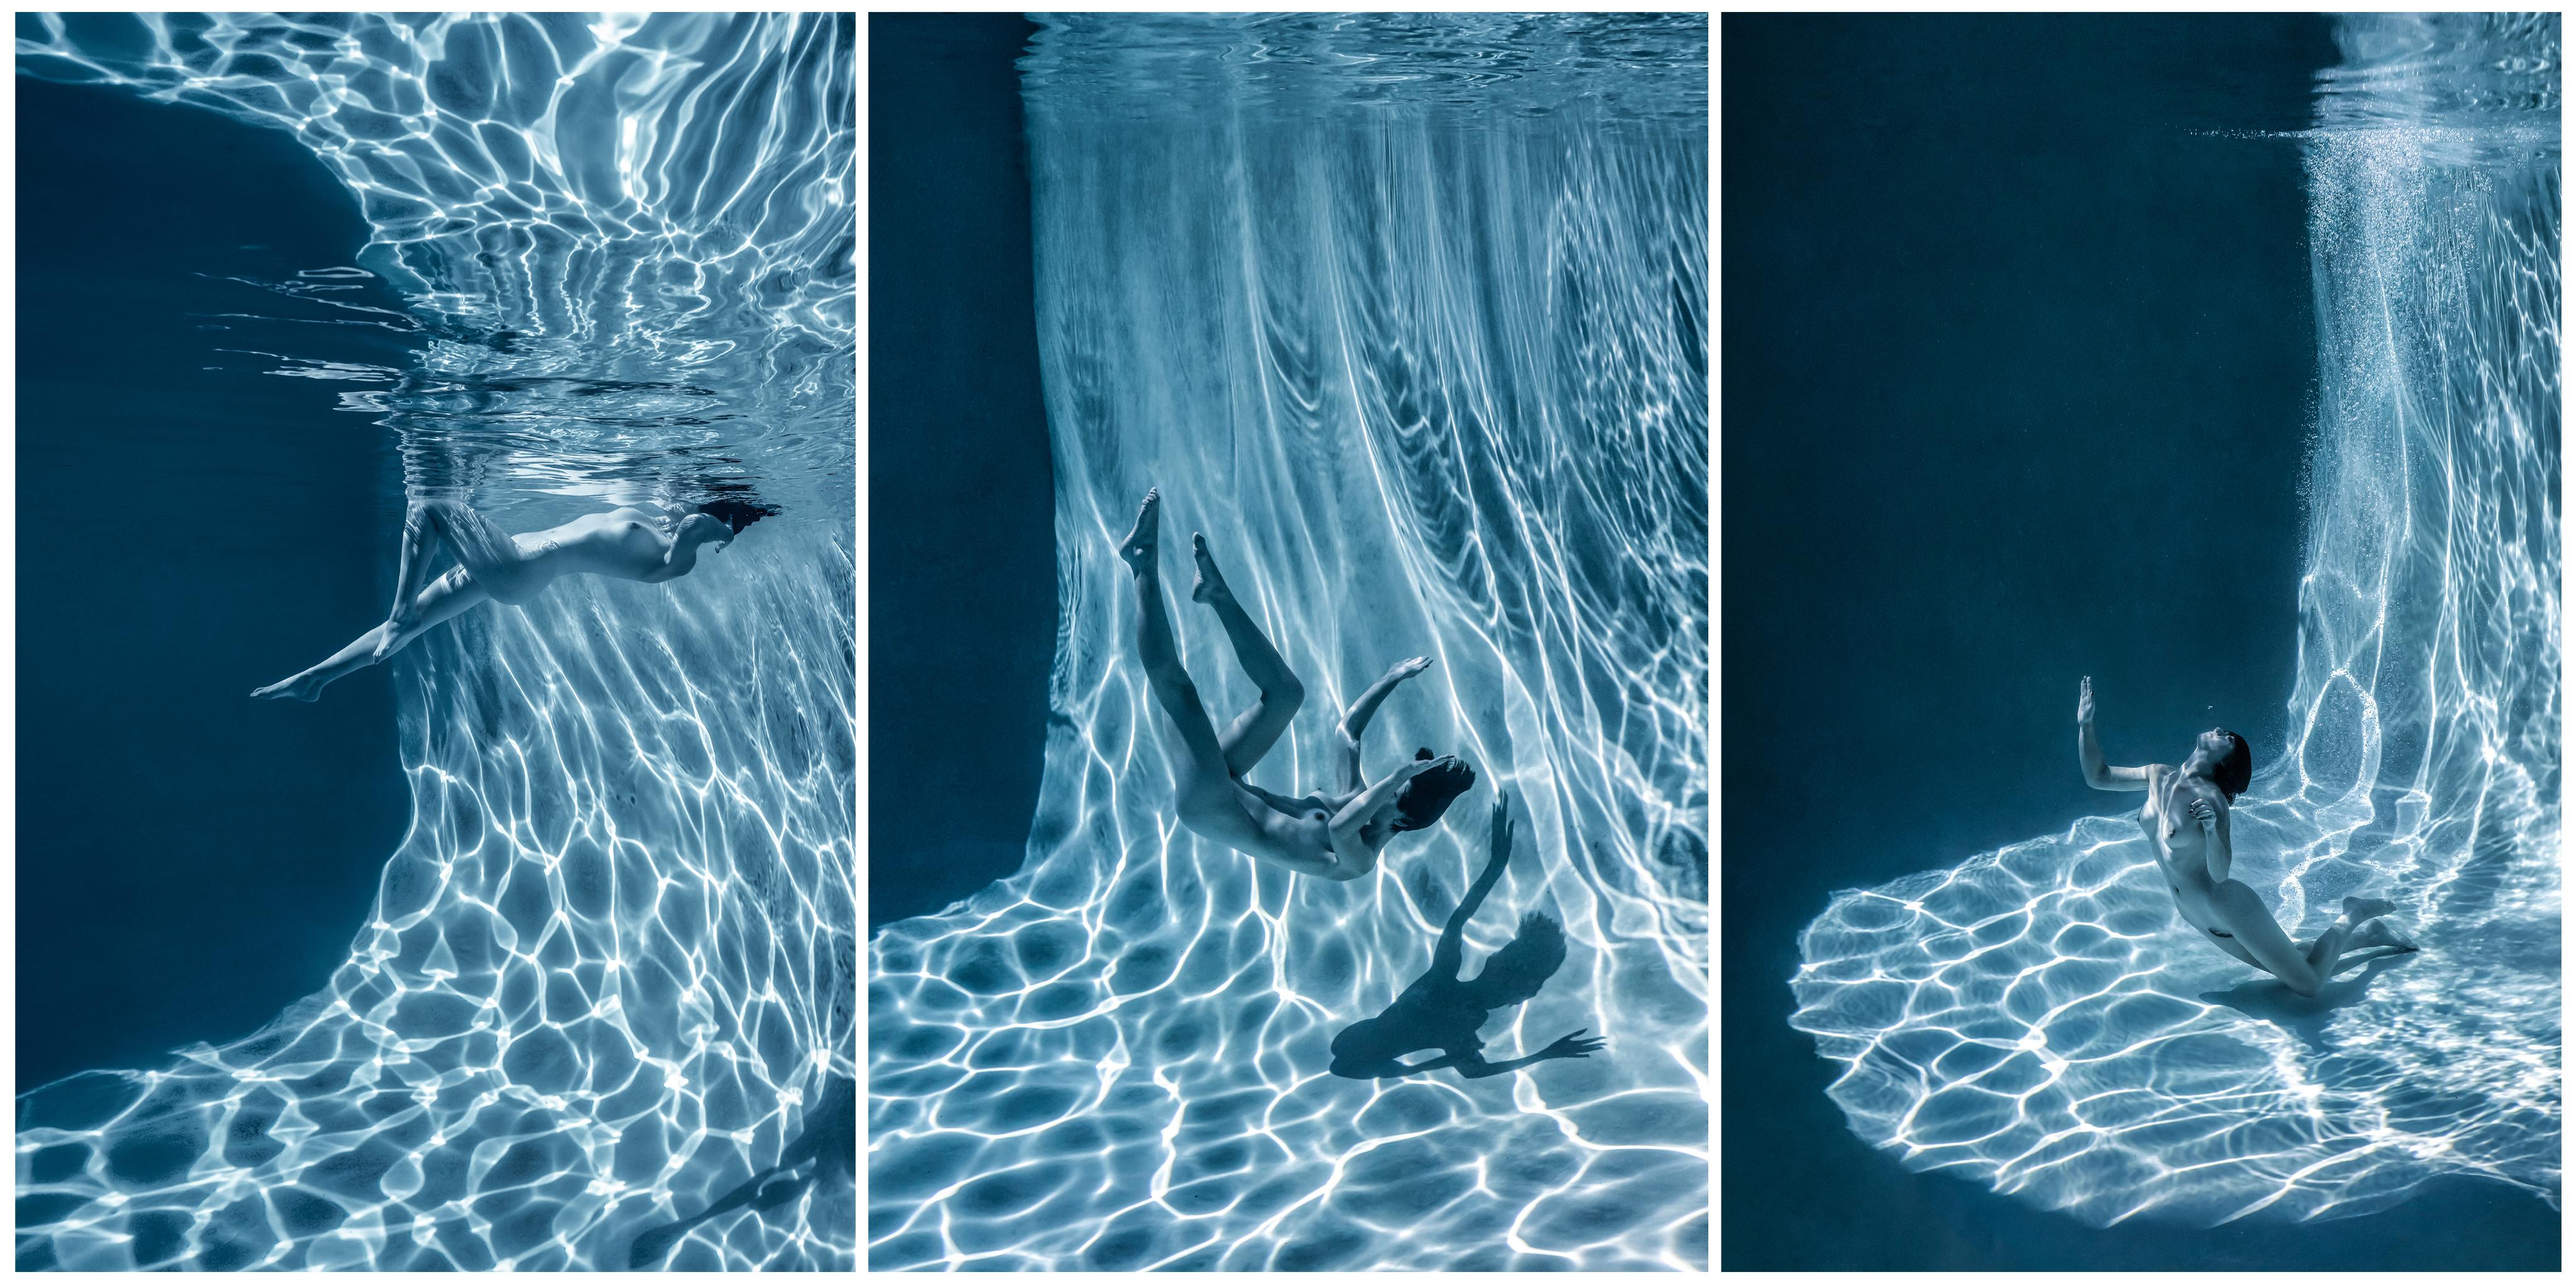 Alex Sher Black and White Photograph - Marble Cave (blue triptych) - underwater nude photograph - 3 prints 24"x18" each